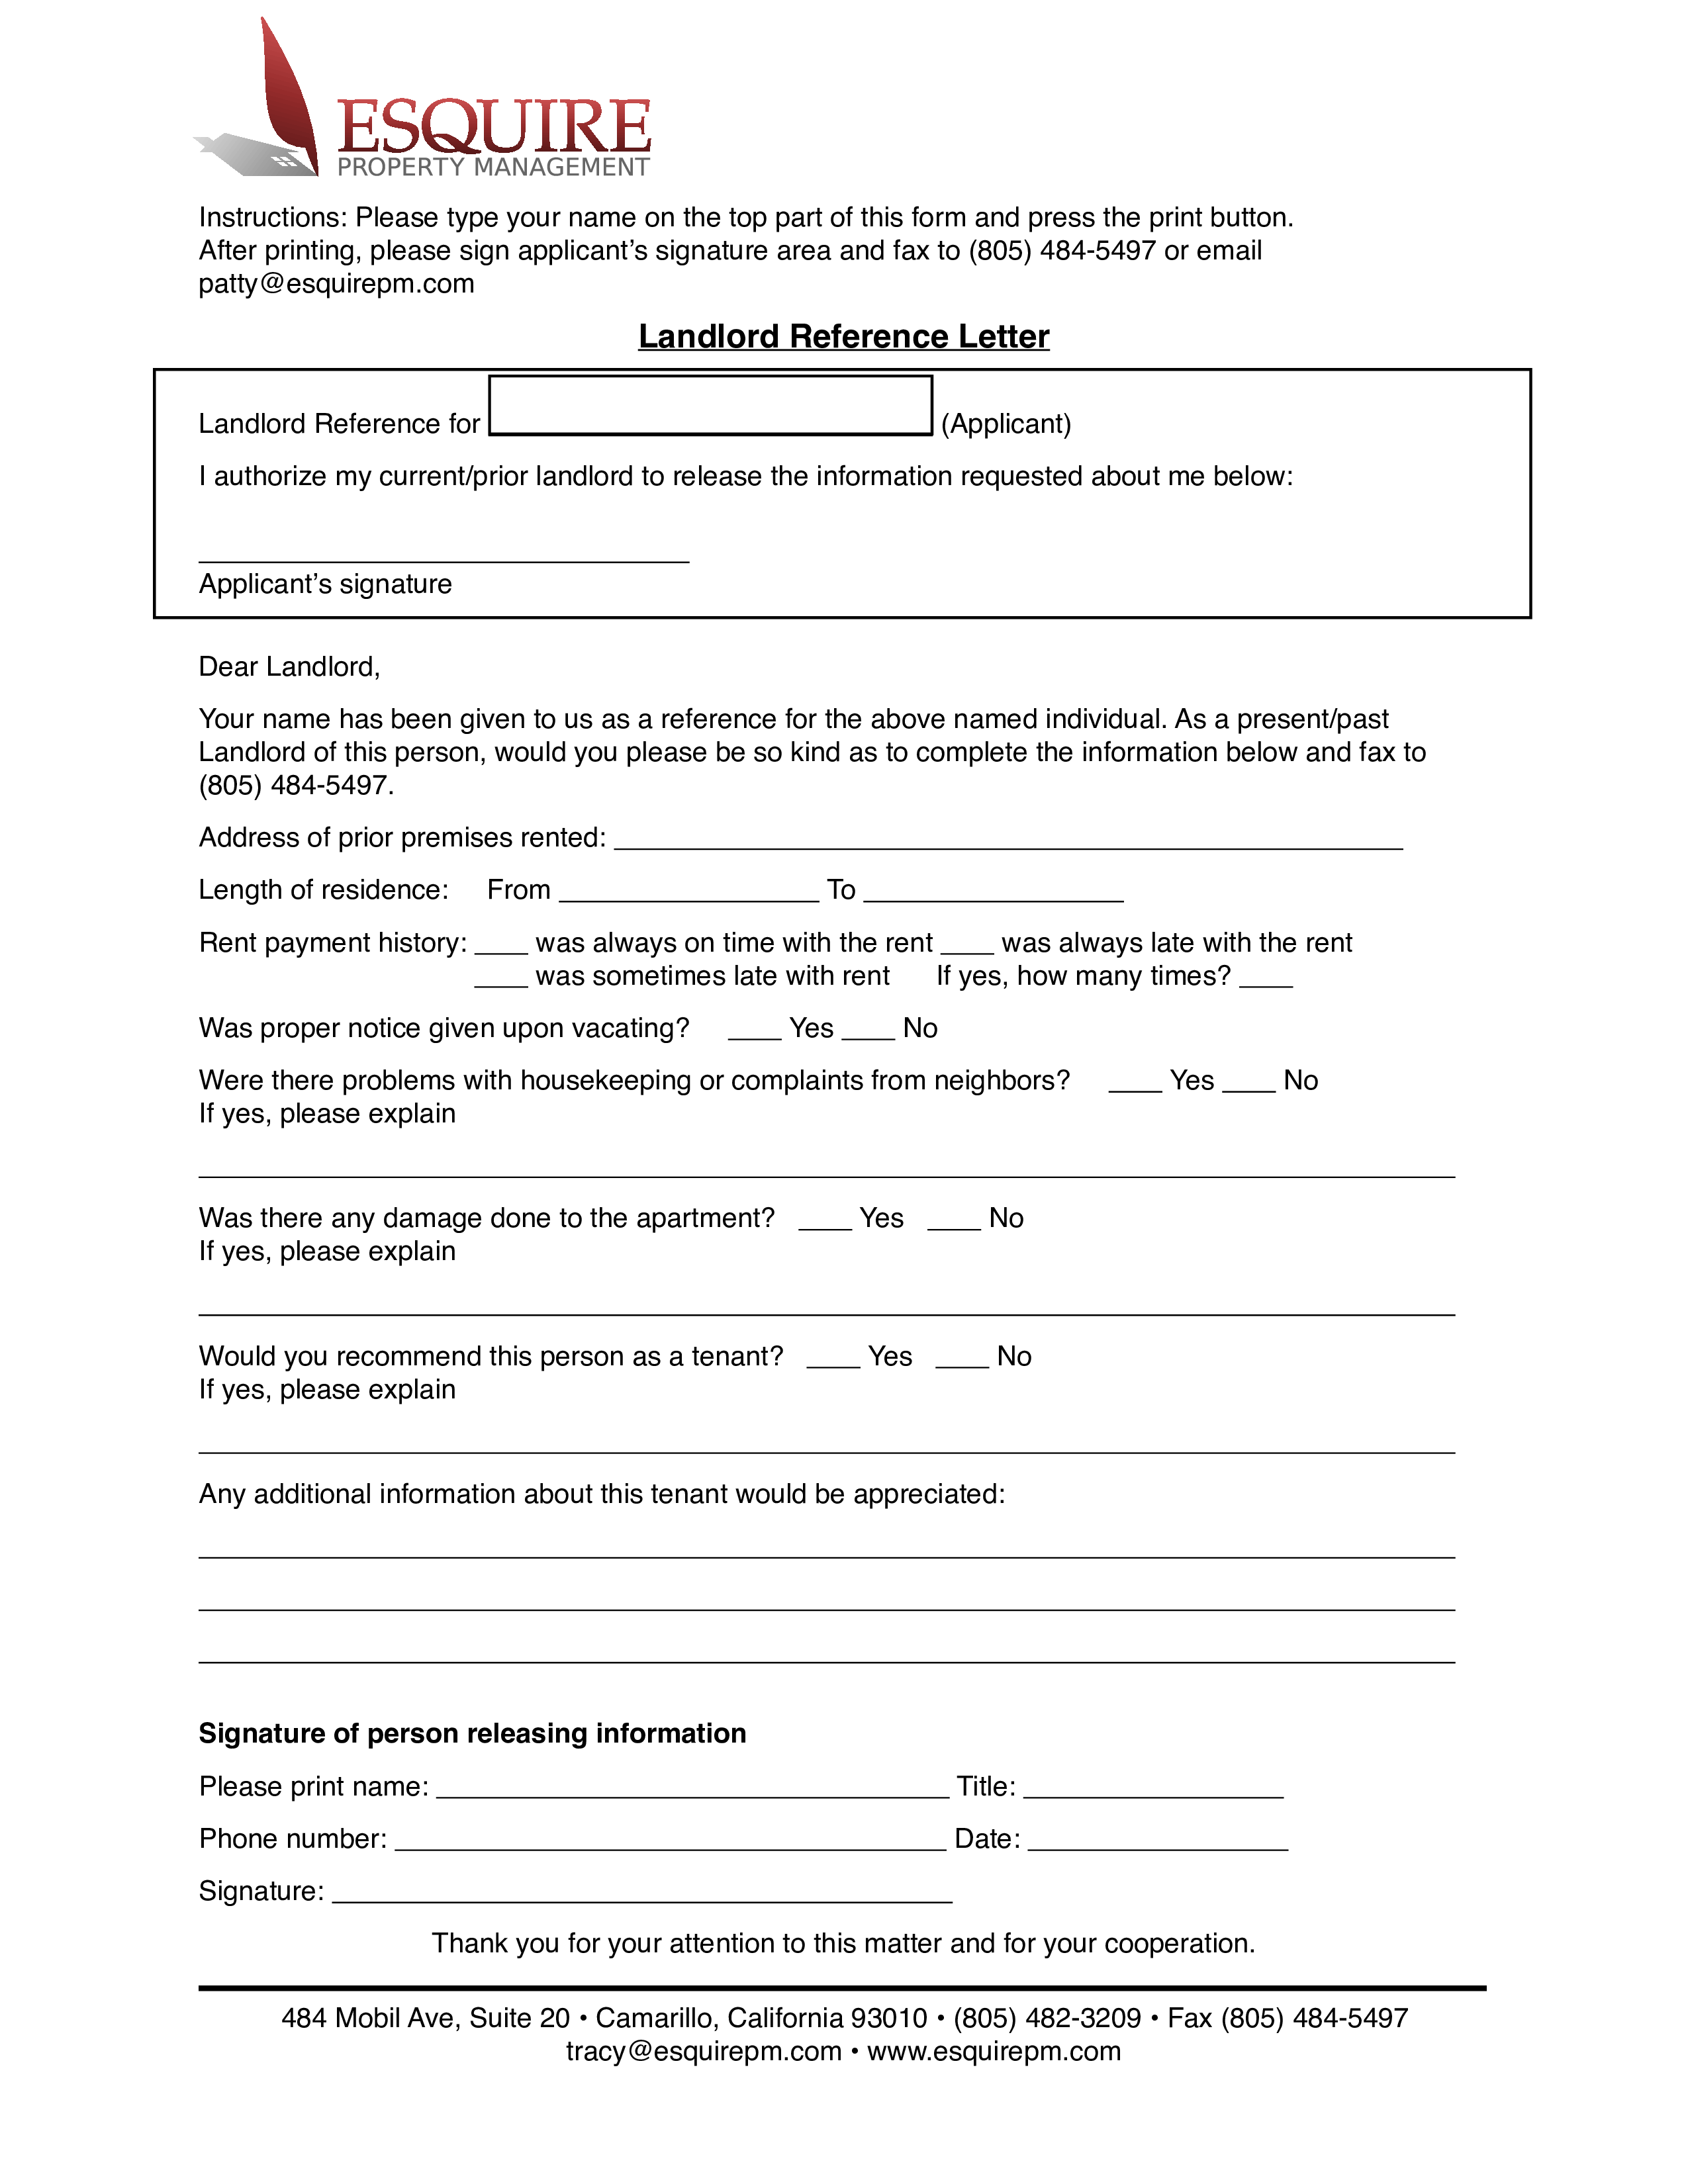 landlord letter of reference sample template